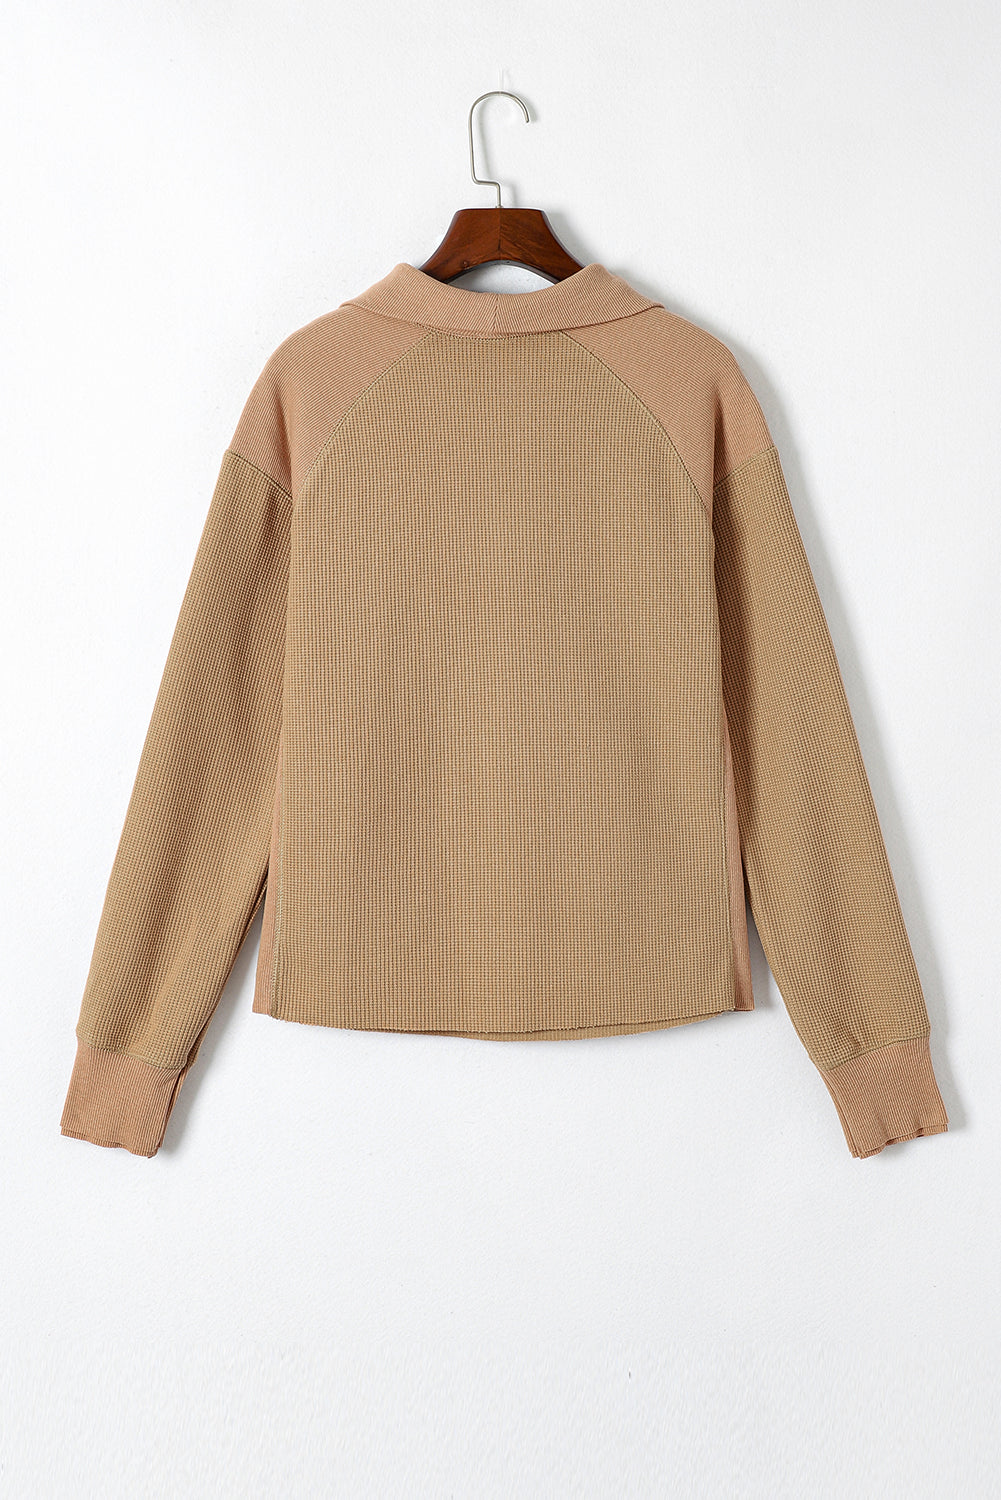 Flaxen Waffle Knit Patchwork Zipped Collared Long Sleeve Top